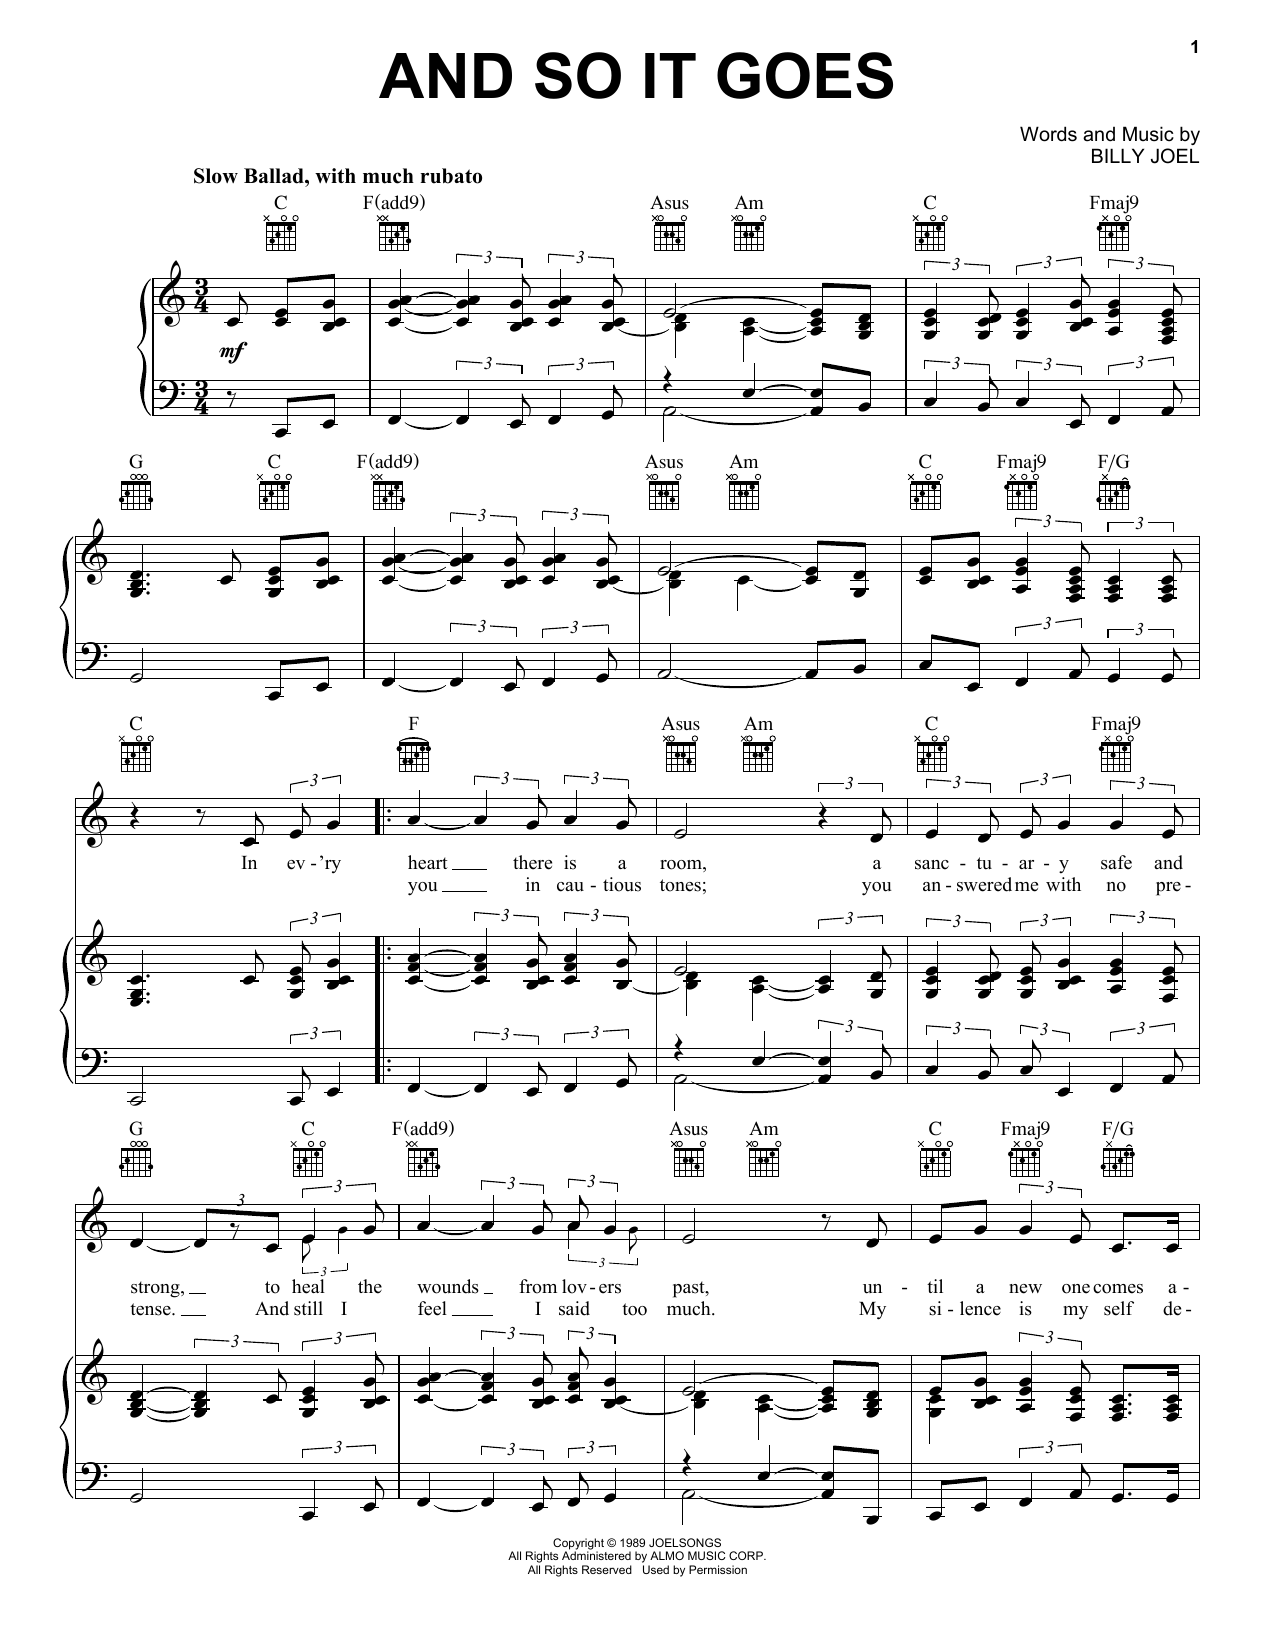 Billy Joel And So It Goes sheet music notes and chords. Download Printable PDF.